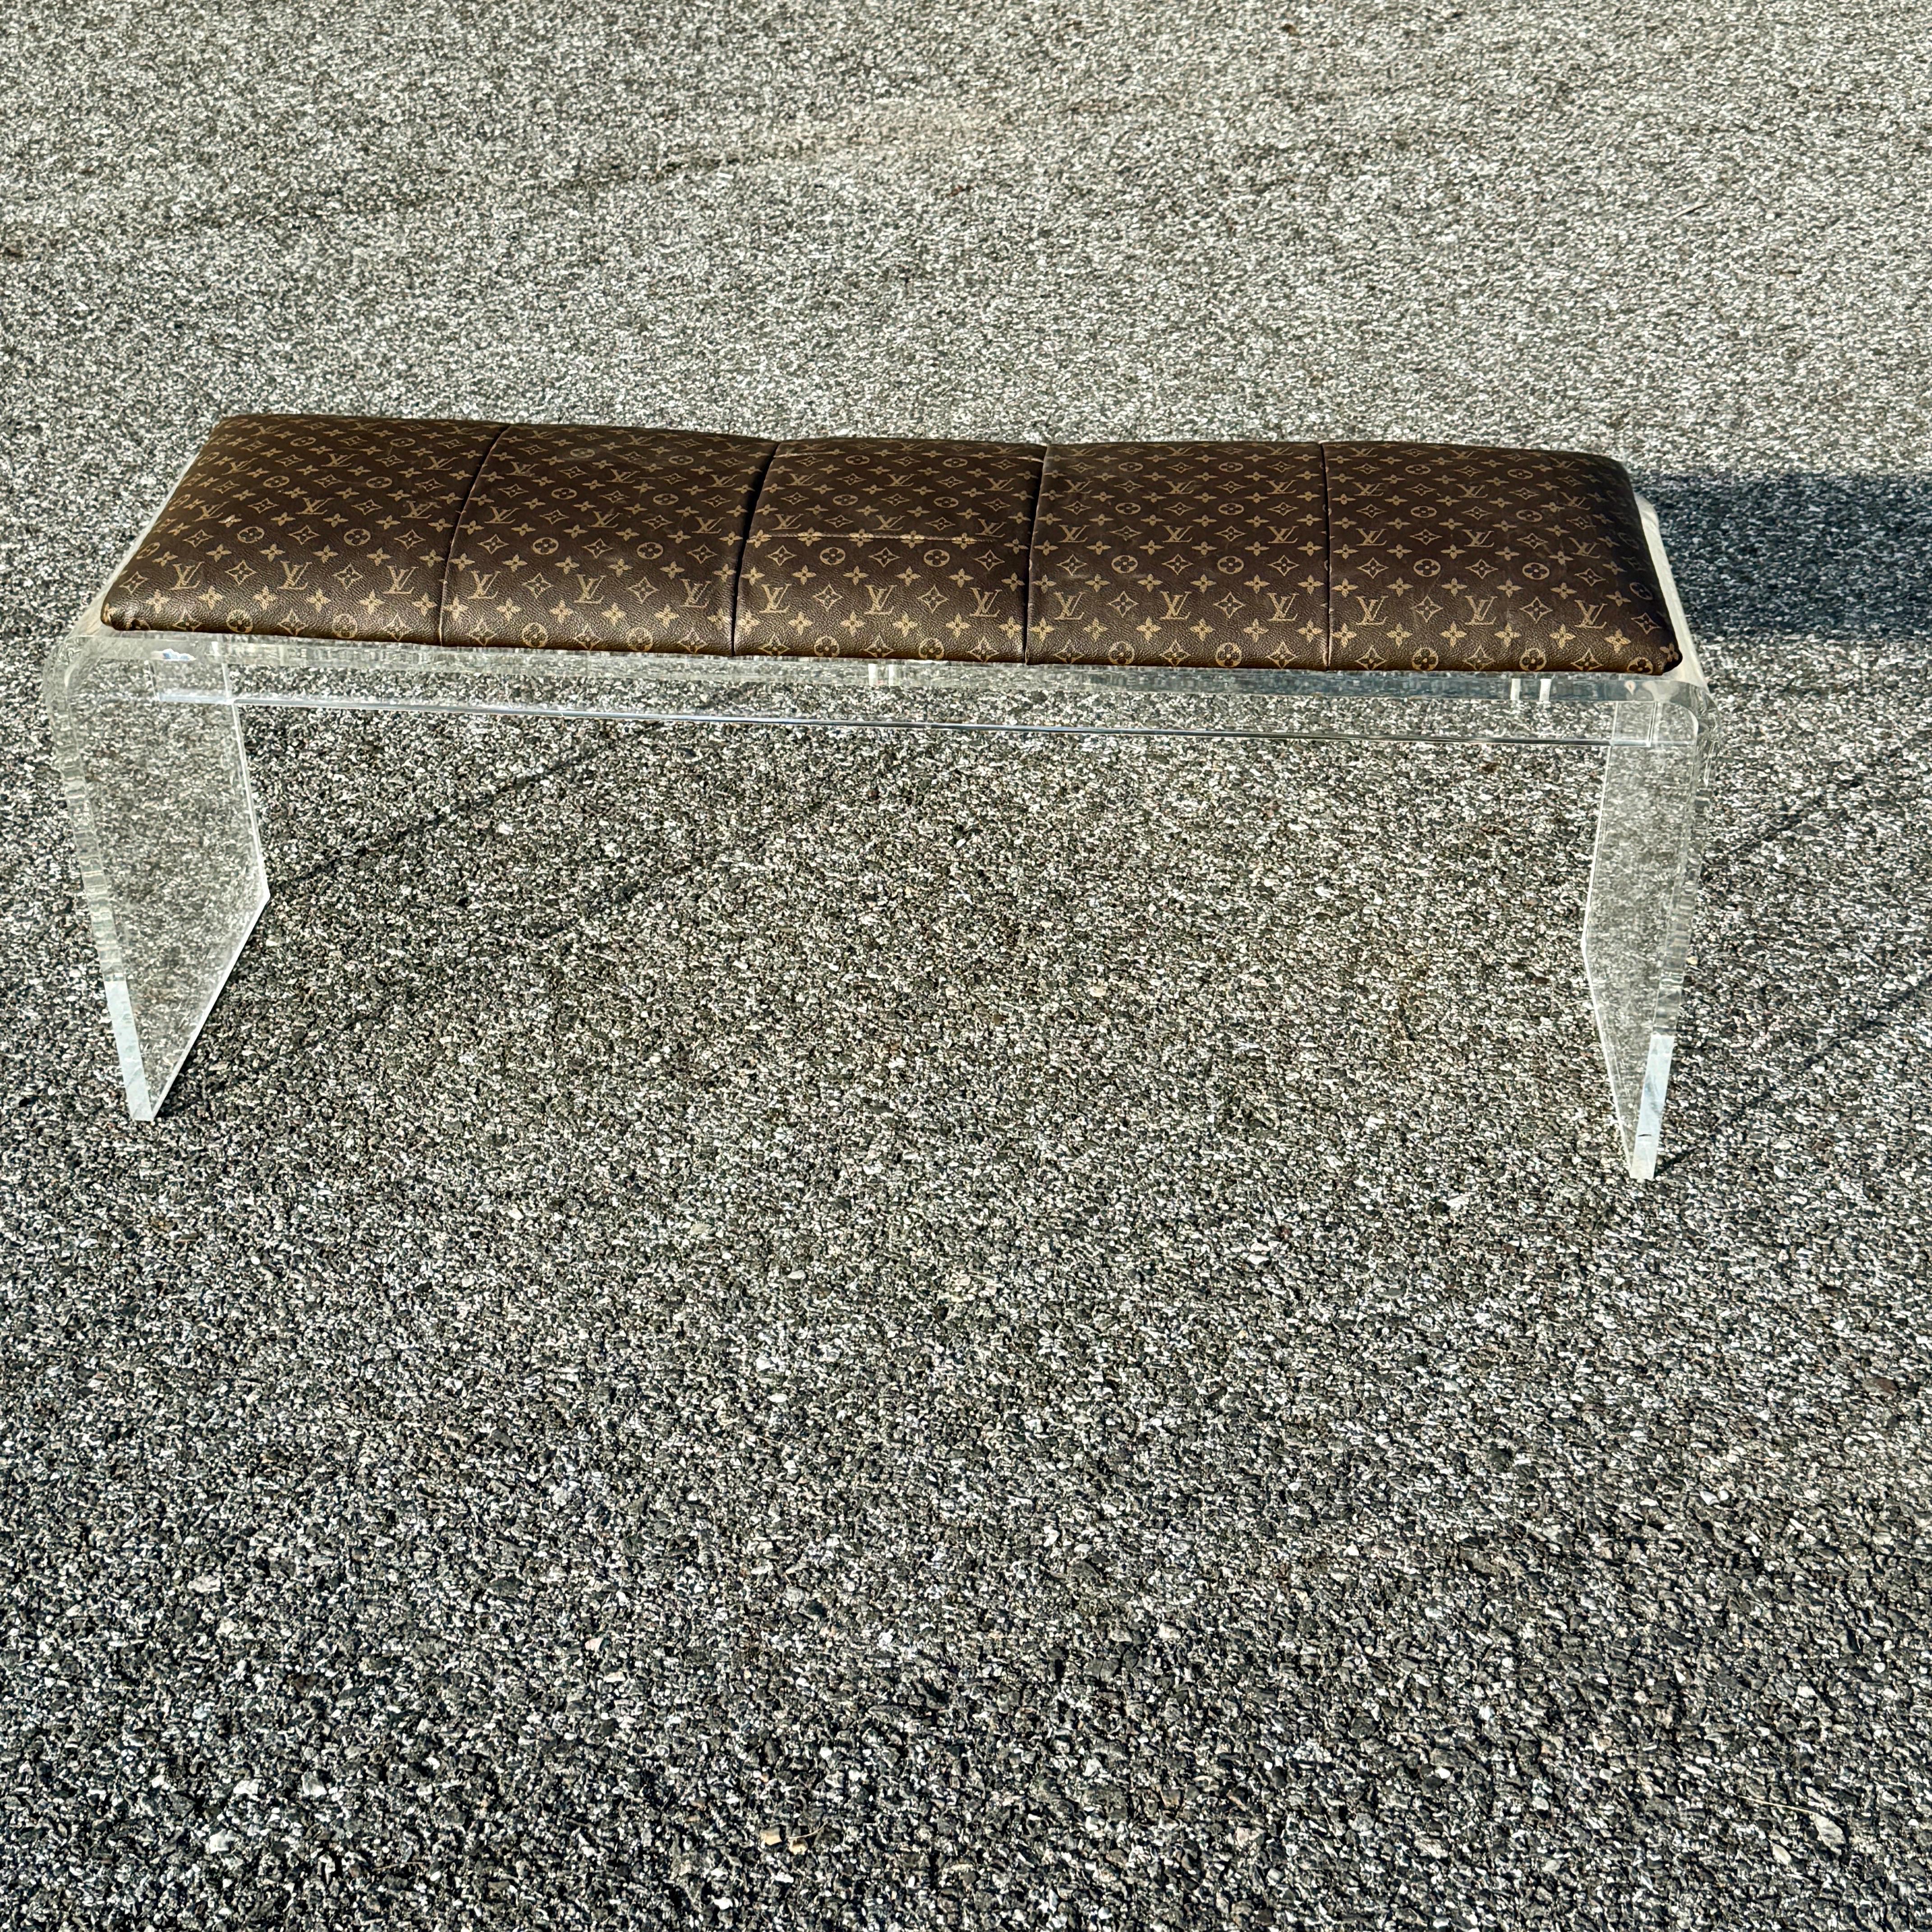 Lucite Bench Upholstered in Louis Vuitton Monogram Fabric  For Sale 5